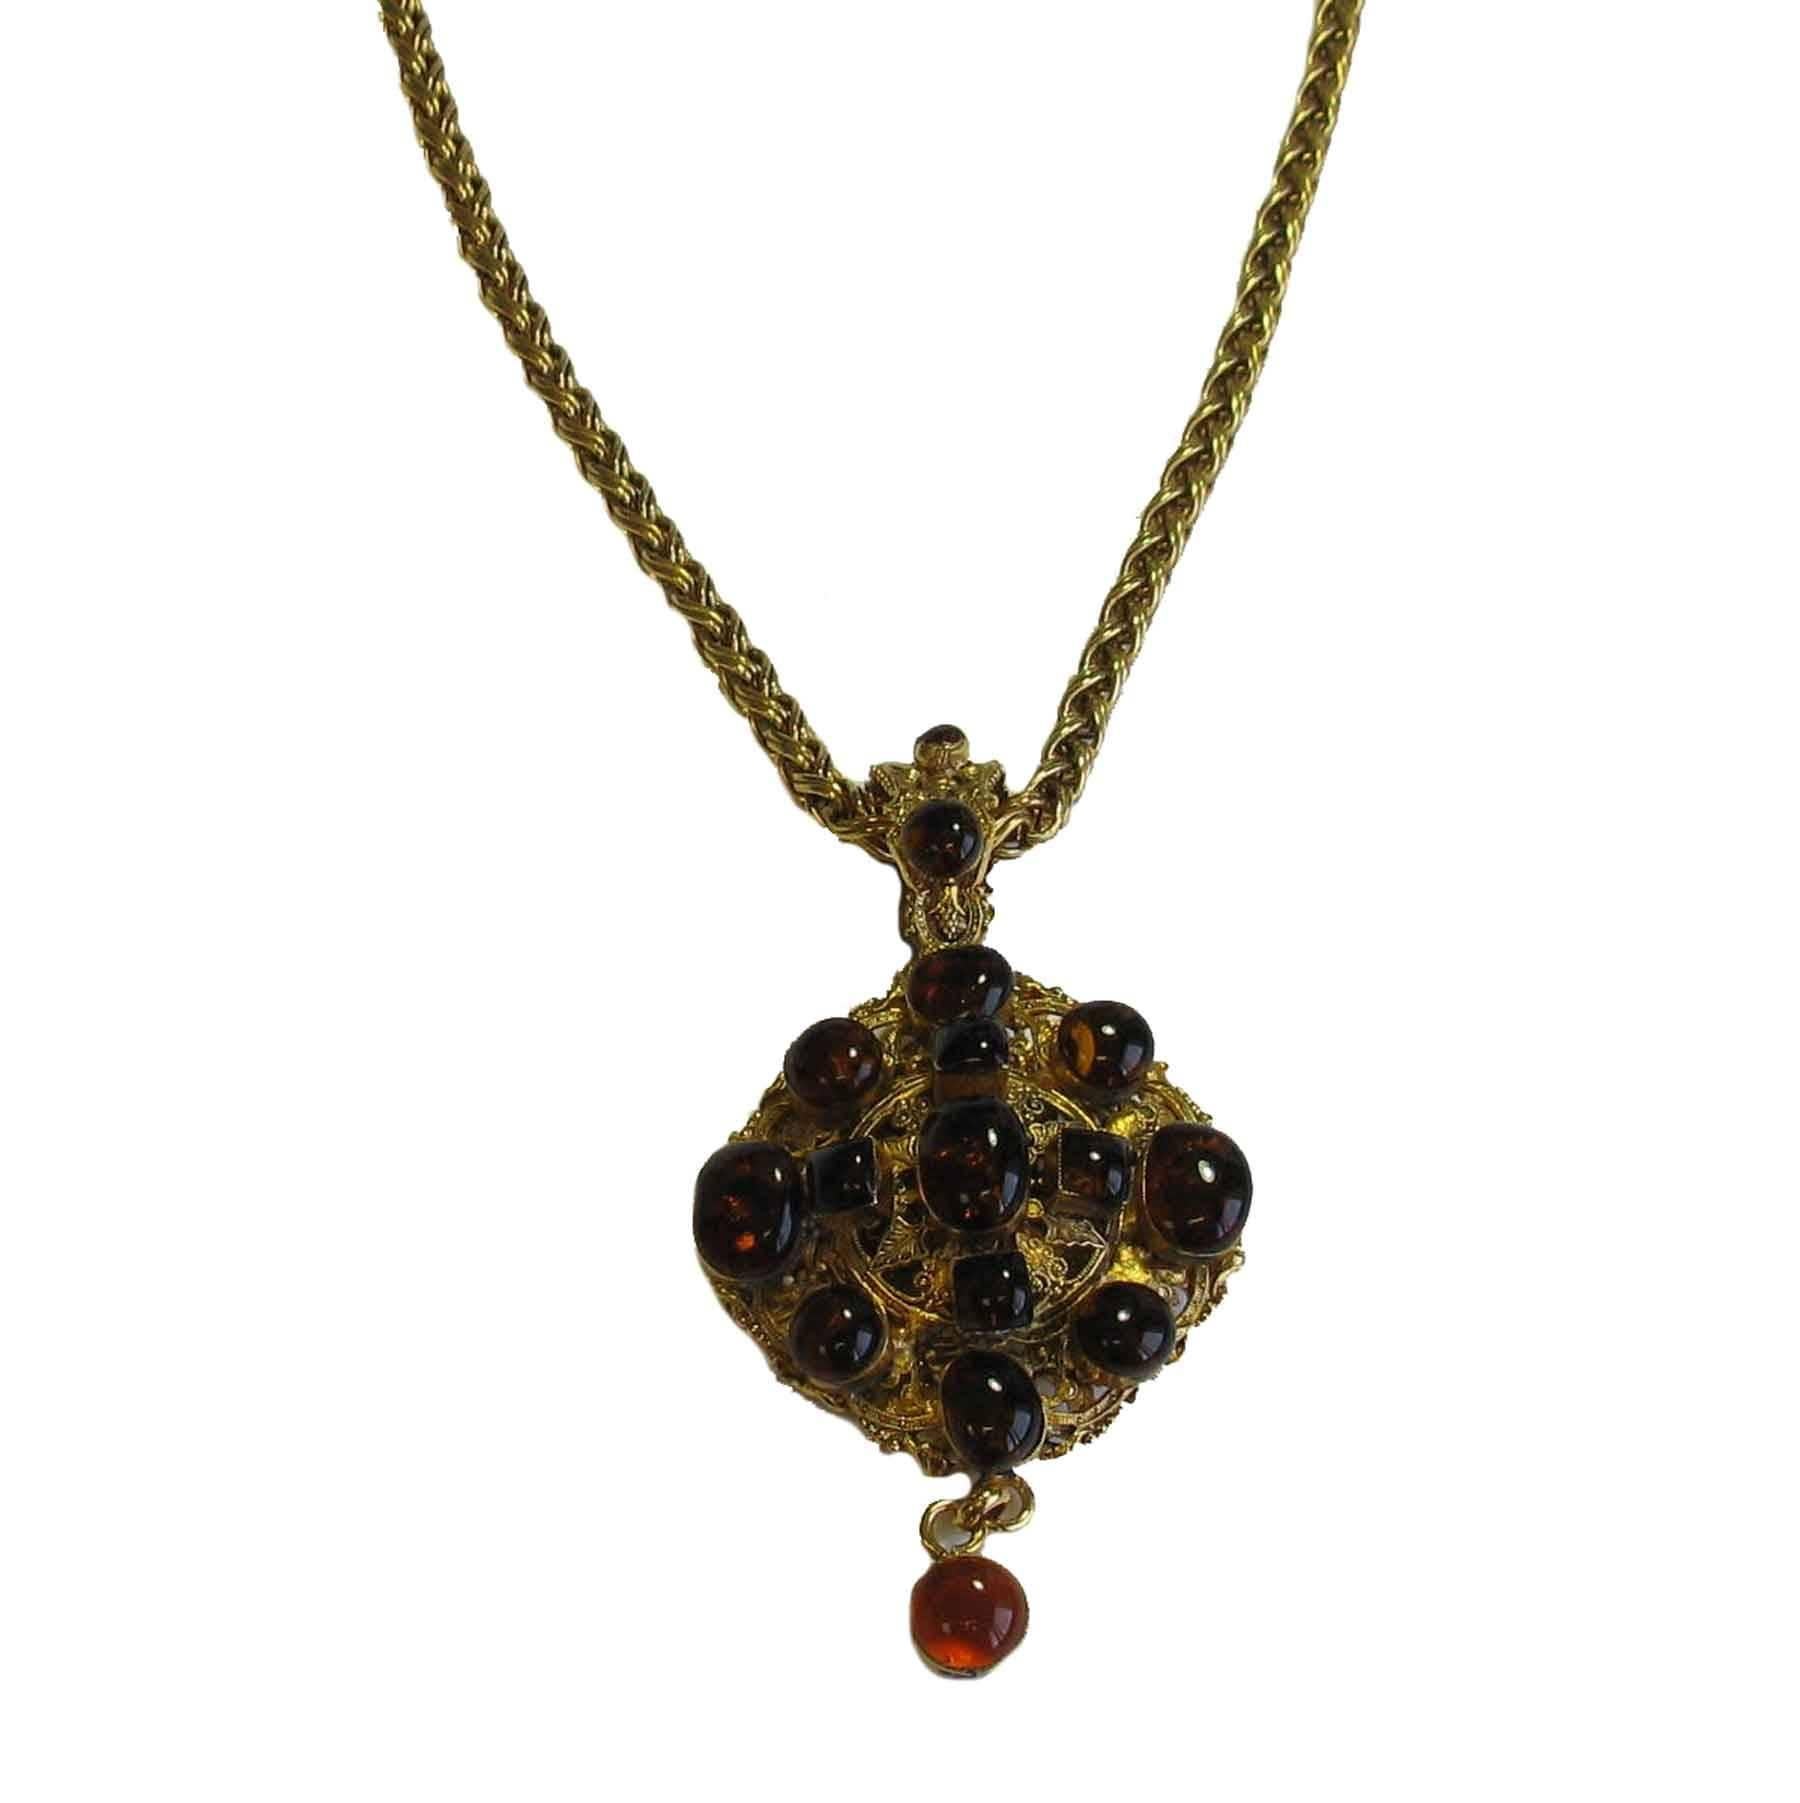 Women's MARGUERITE DE VALOIS Necklace in Gilded Metal and Pendant in Topaze Molten Glass